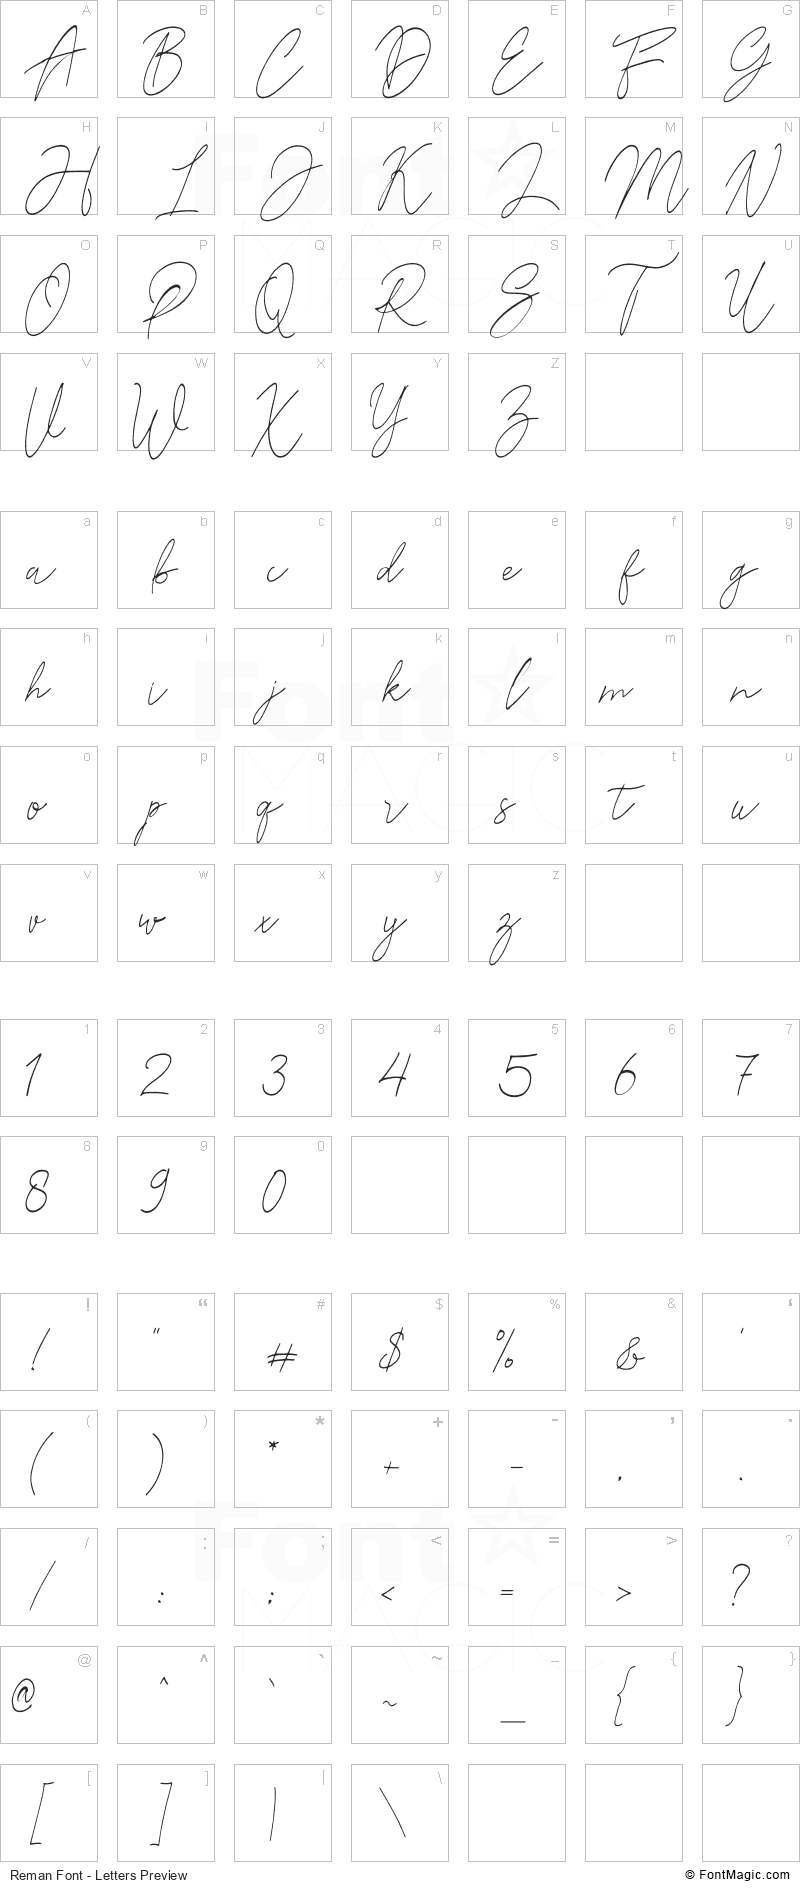 Reman Font - All Latters Preview Chart